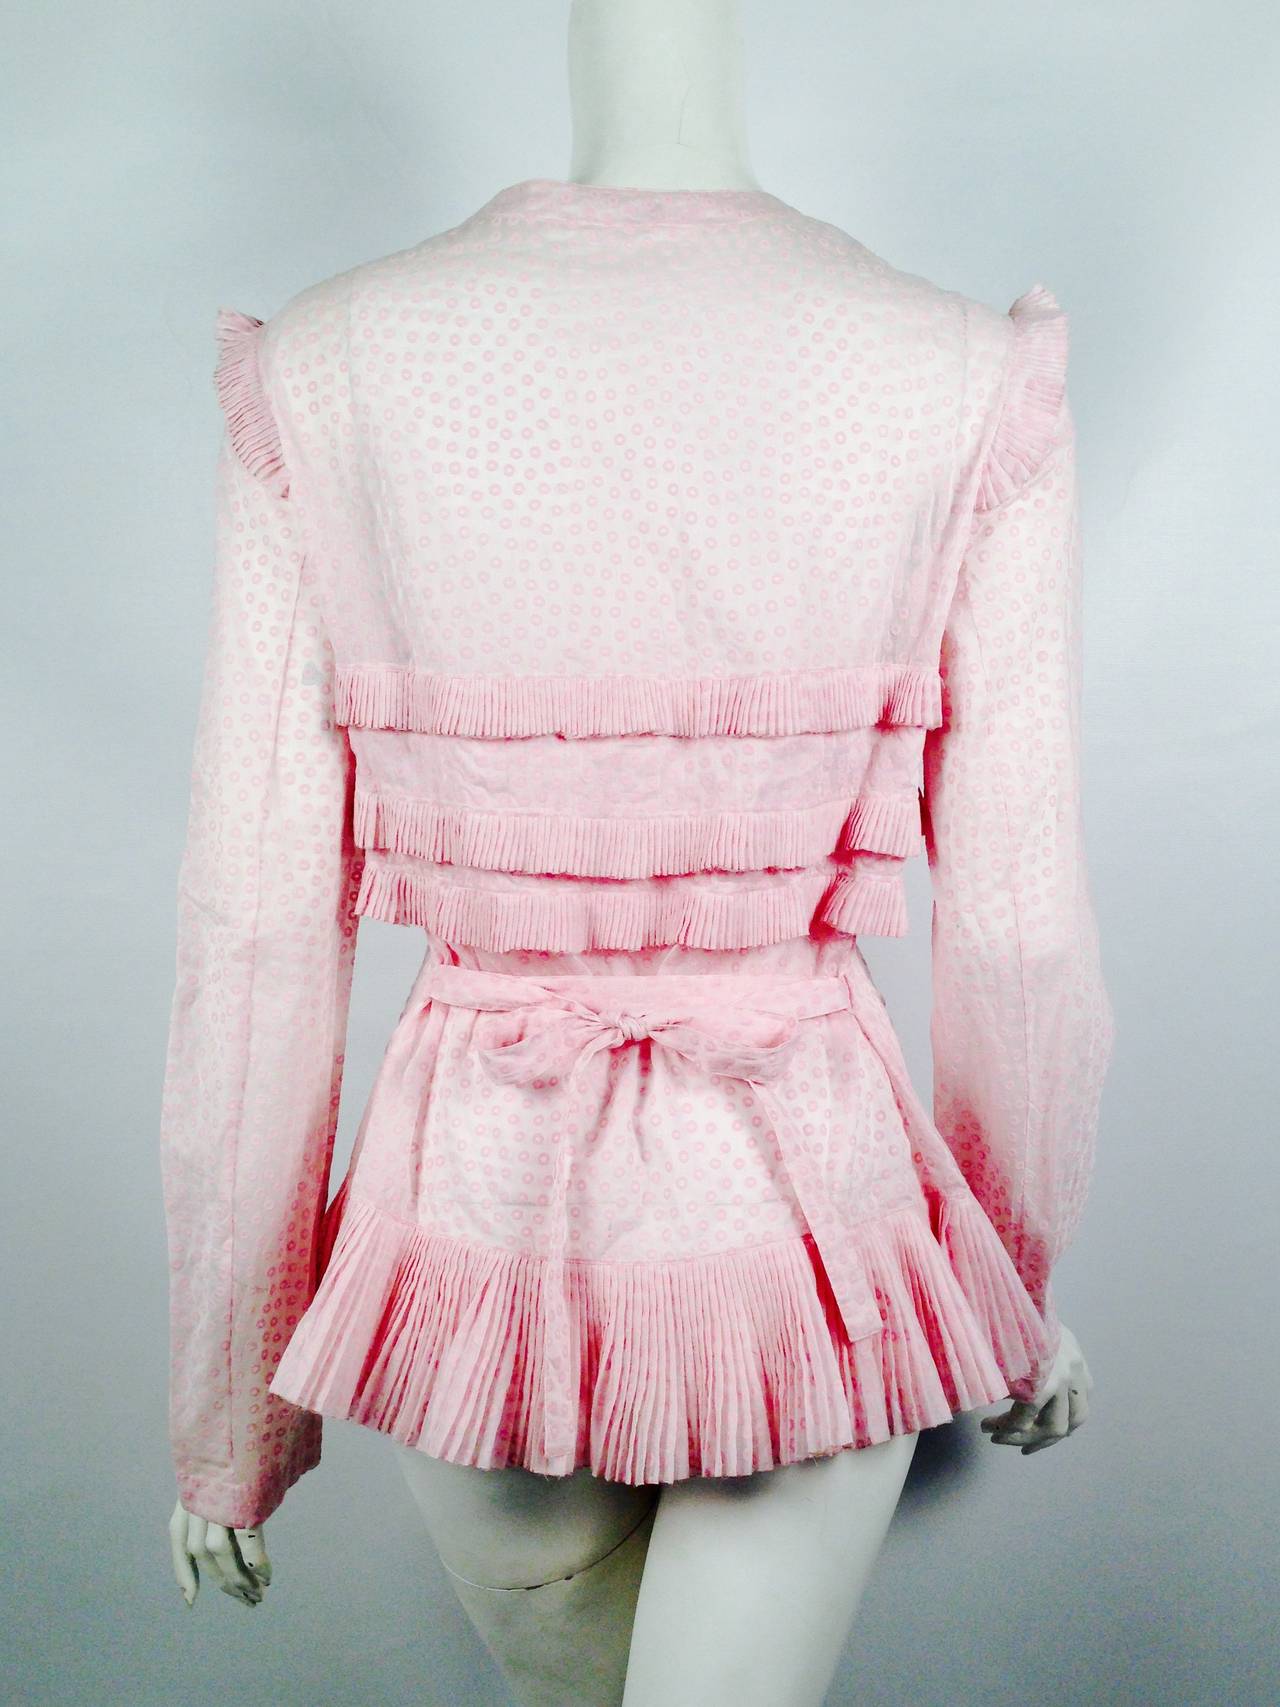 Alaia Paris Petal Pink Polka Dot Blouse In Excellent Condition For Sale In Palm Beach, FL